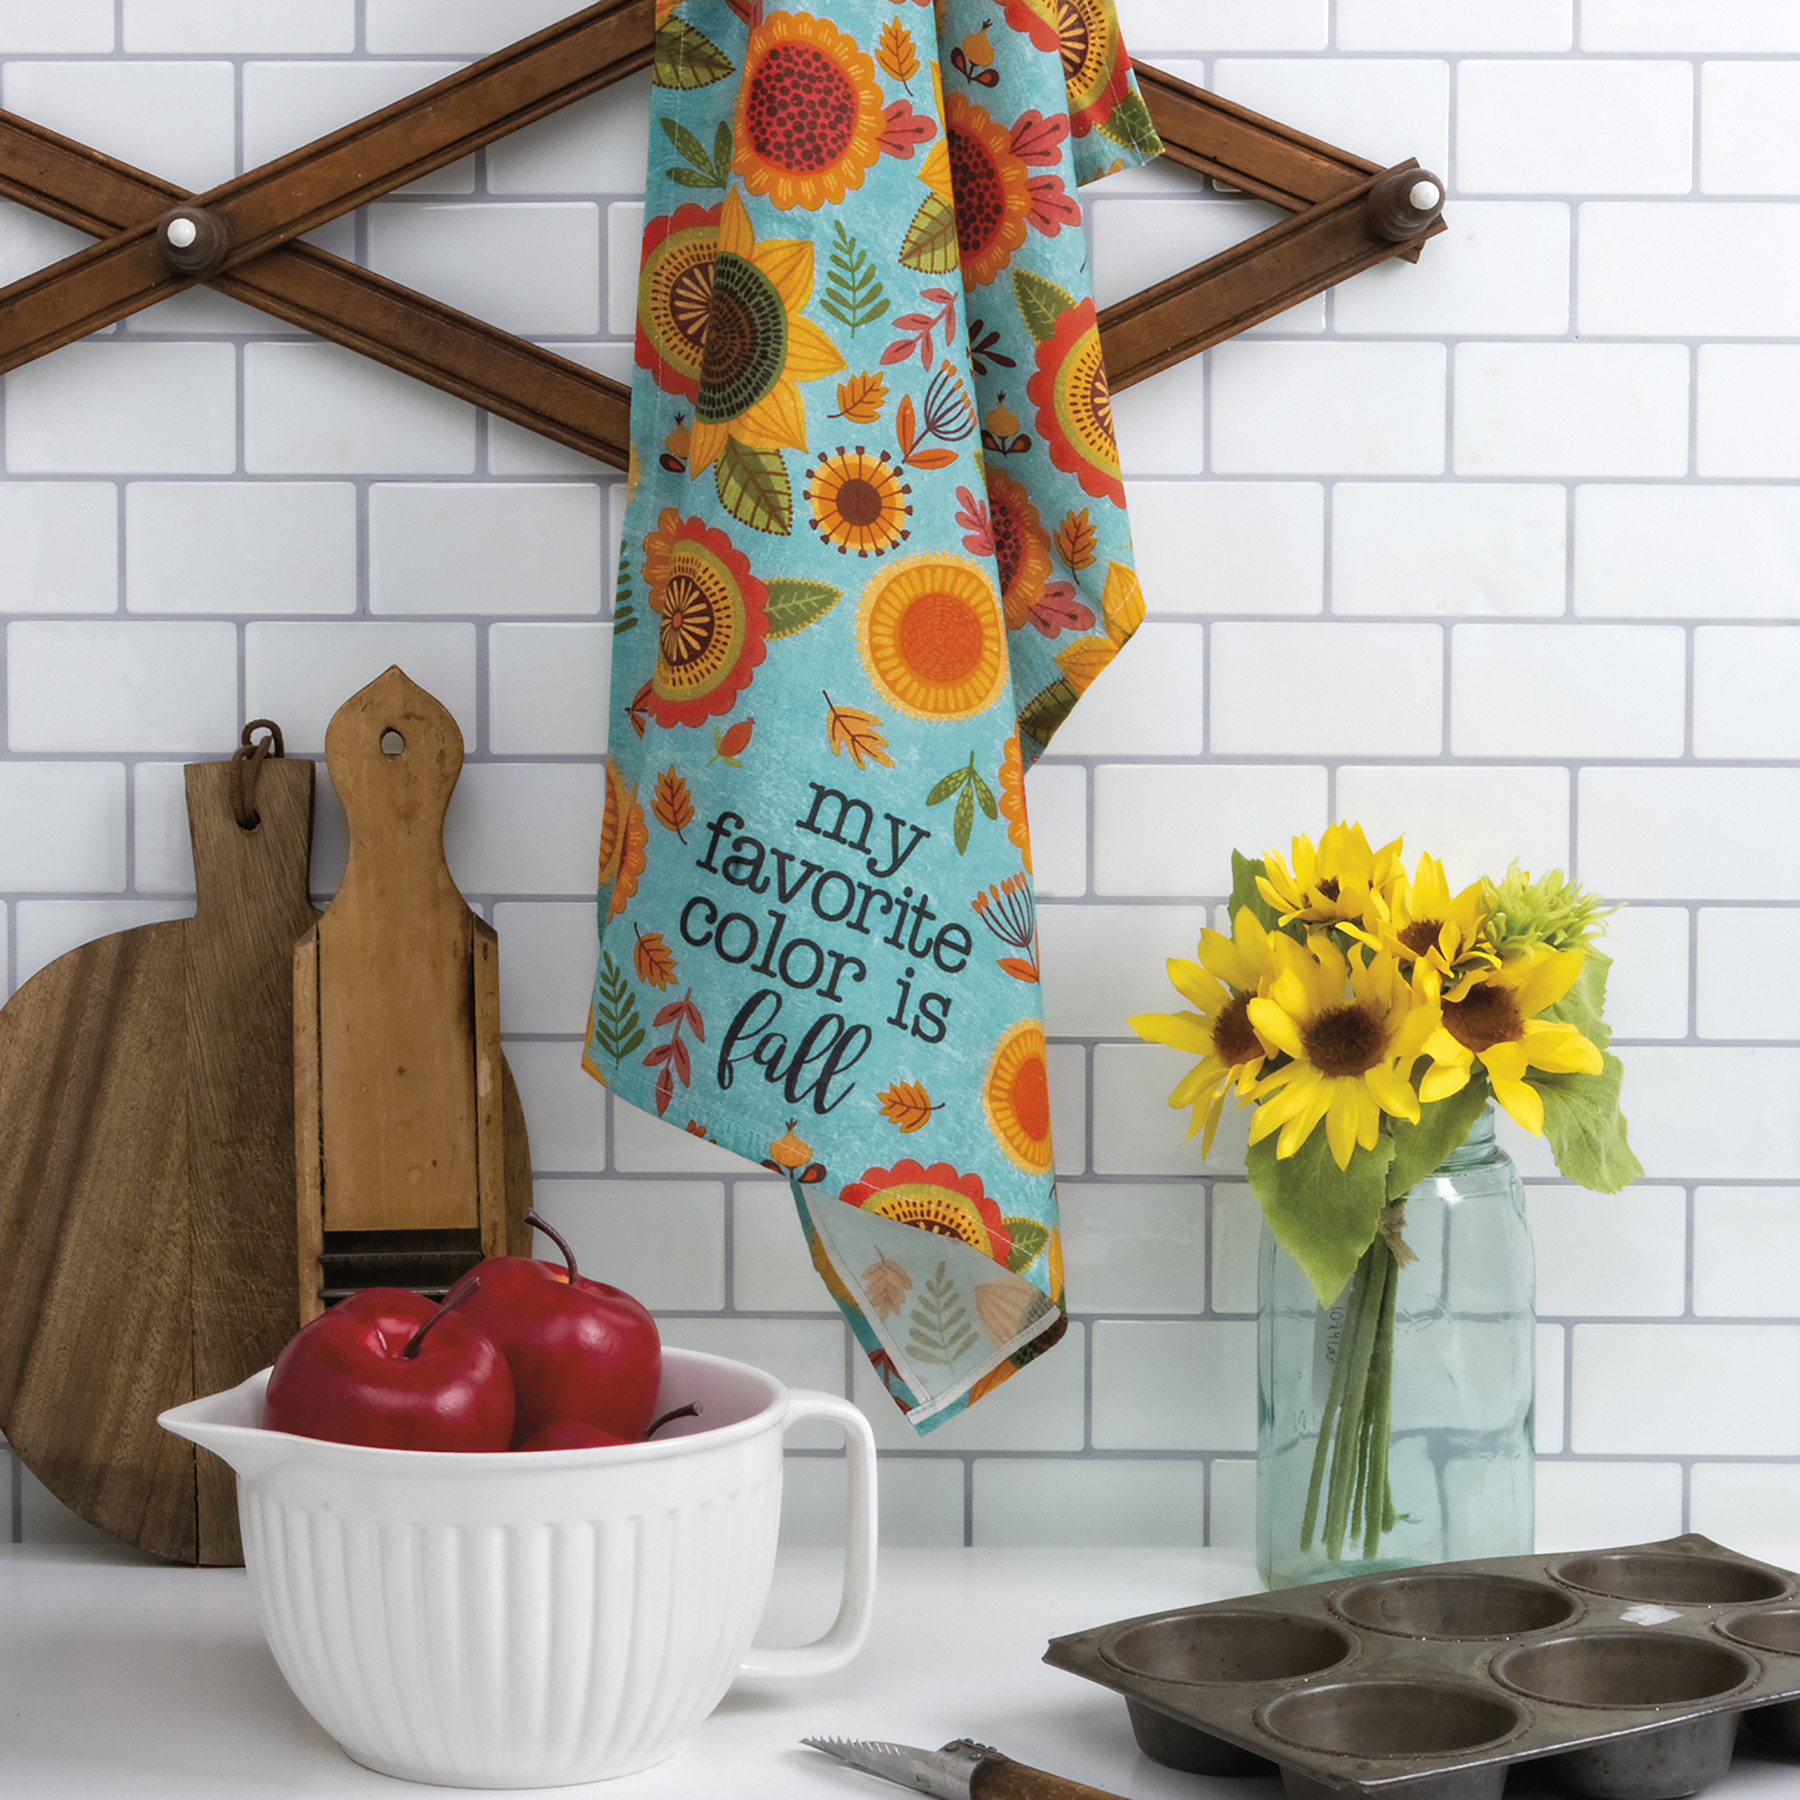 Soft and Stylish Kitchen Towels for Everyday Use - Brown Color Stylish